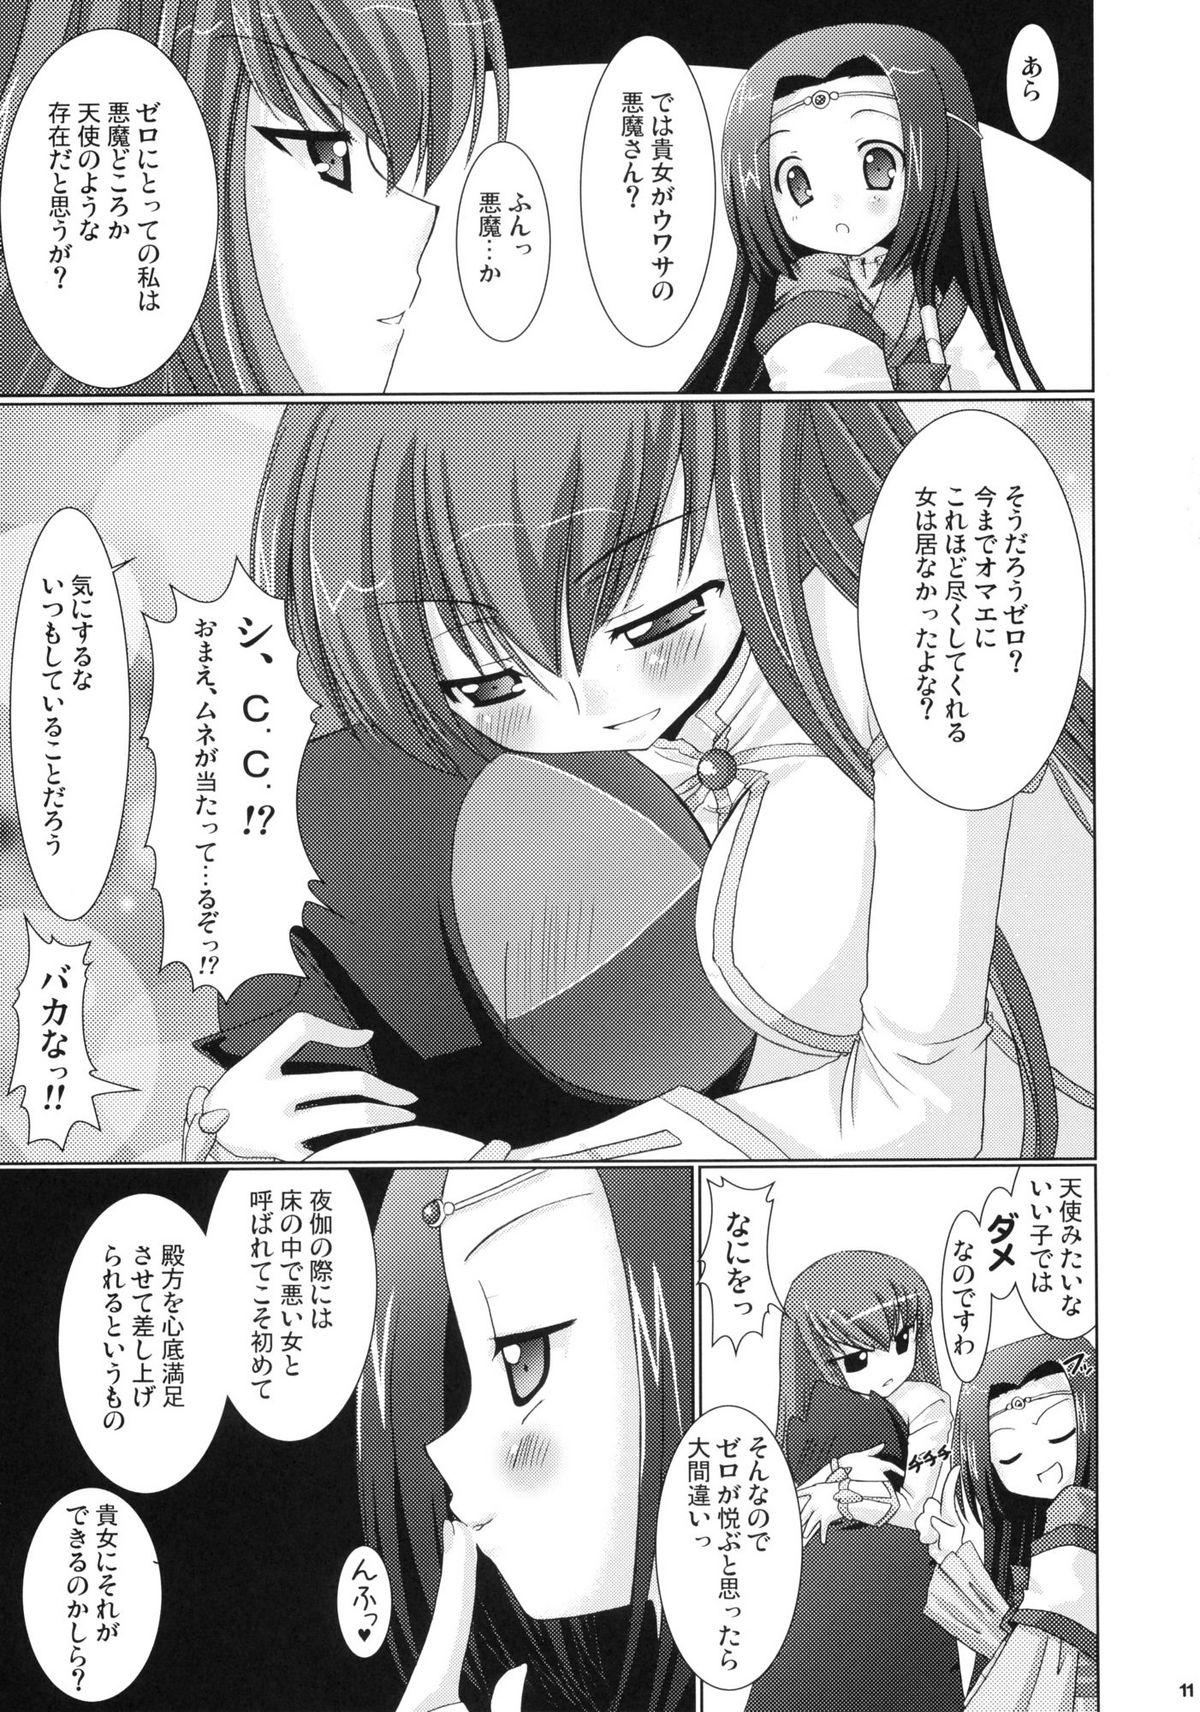 Slut Porn Kouhime Kyouhime - Code geass Chastity - Page 11